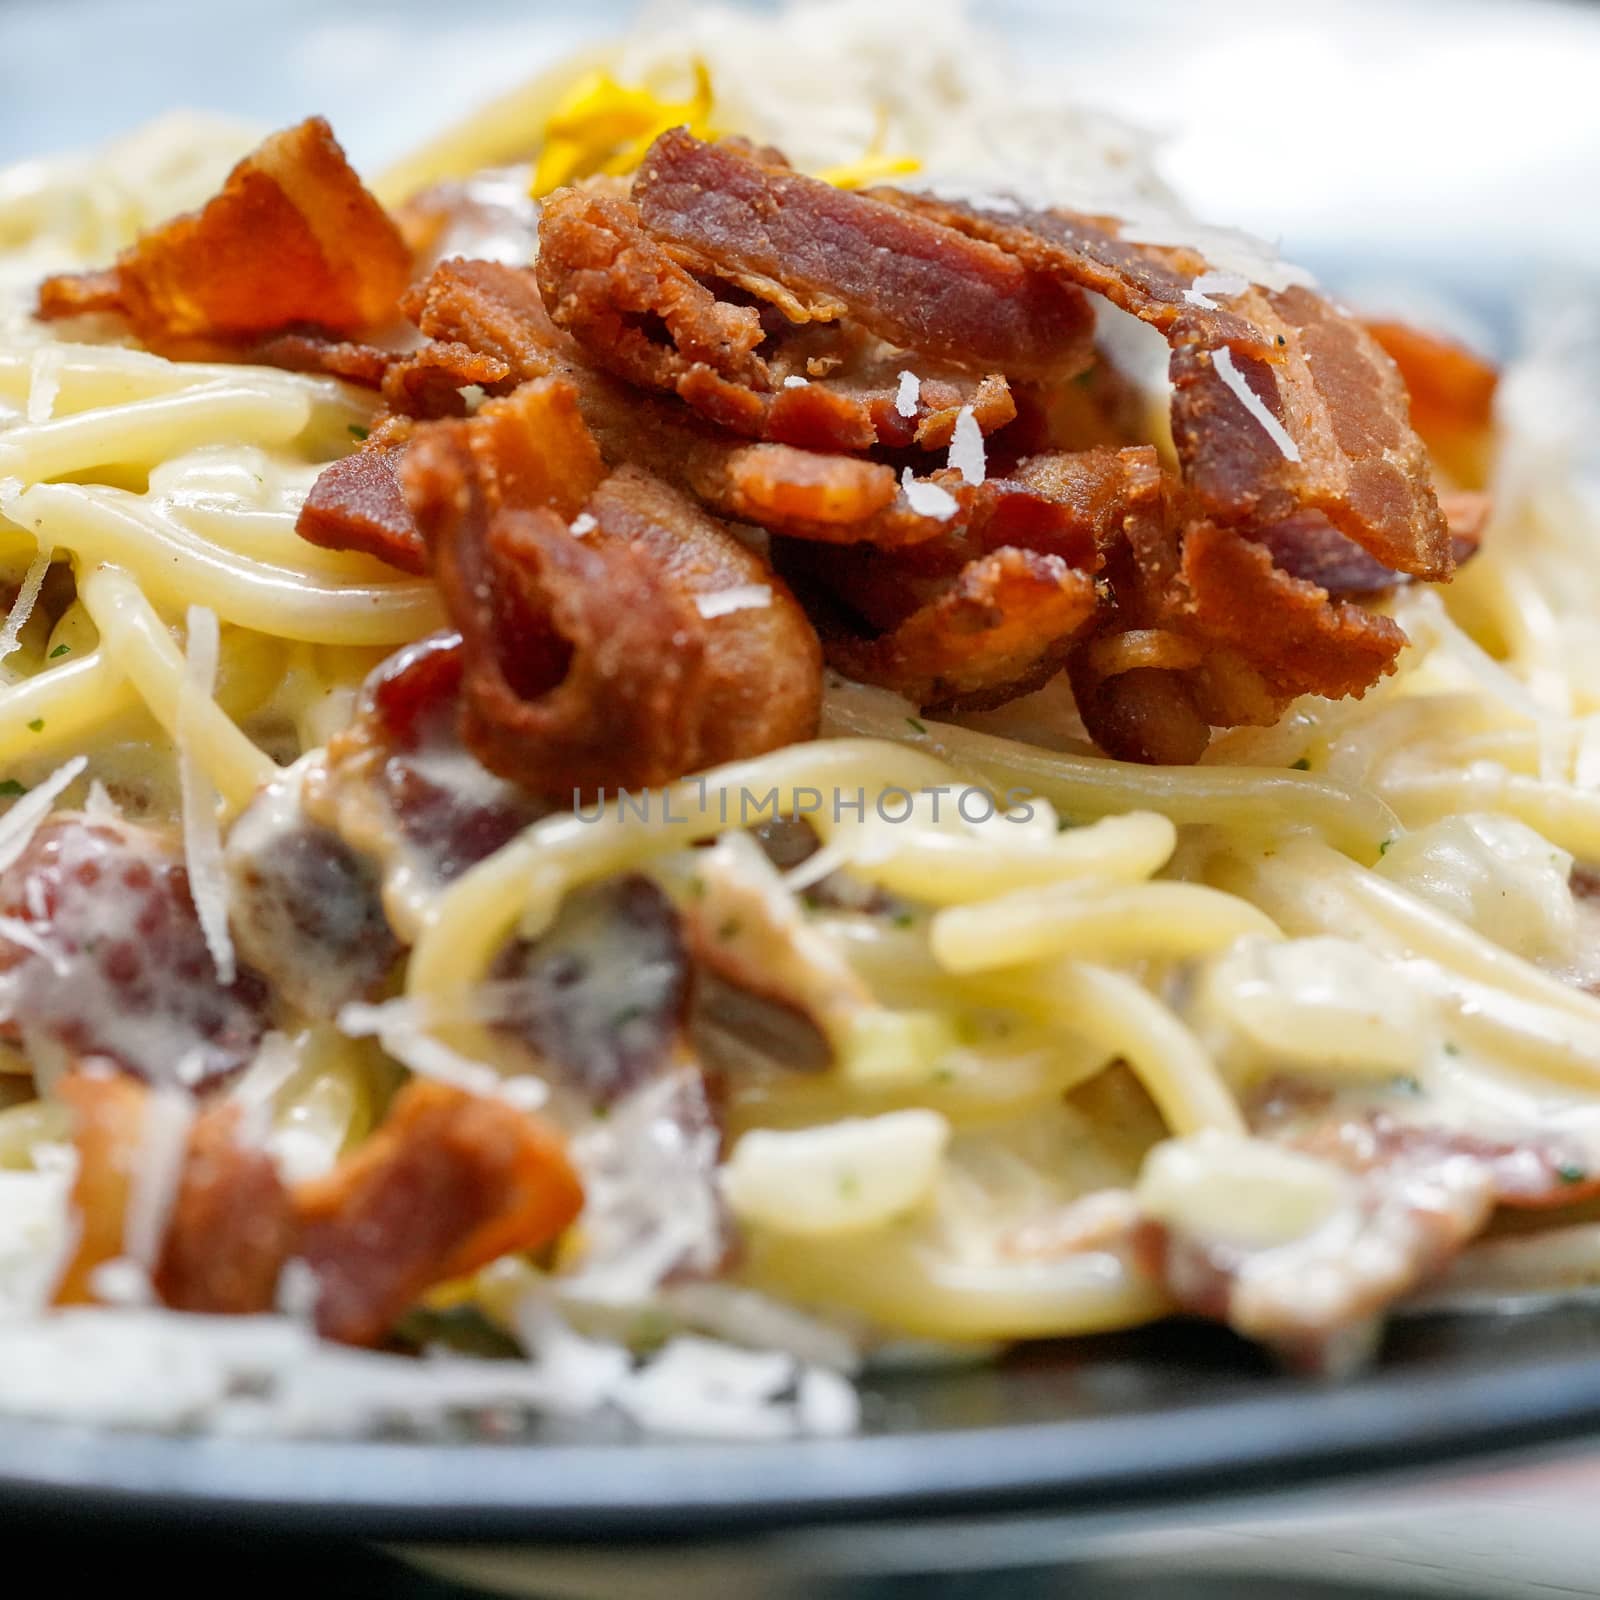 Close up Spaghetti, a delicious pasta served on black plate. Carbonara made with egg, hard cheese, guanciale, bacon and black pepper. Food Background.